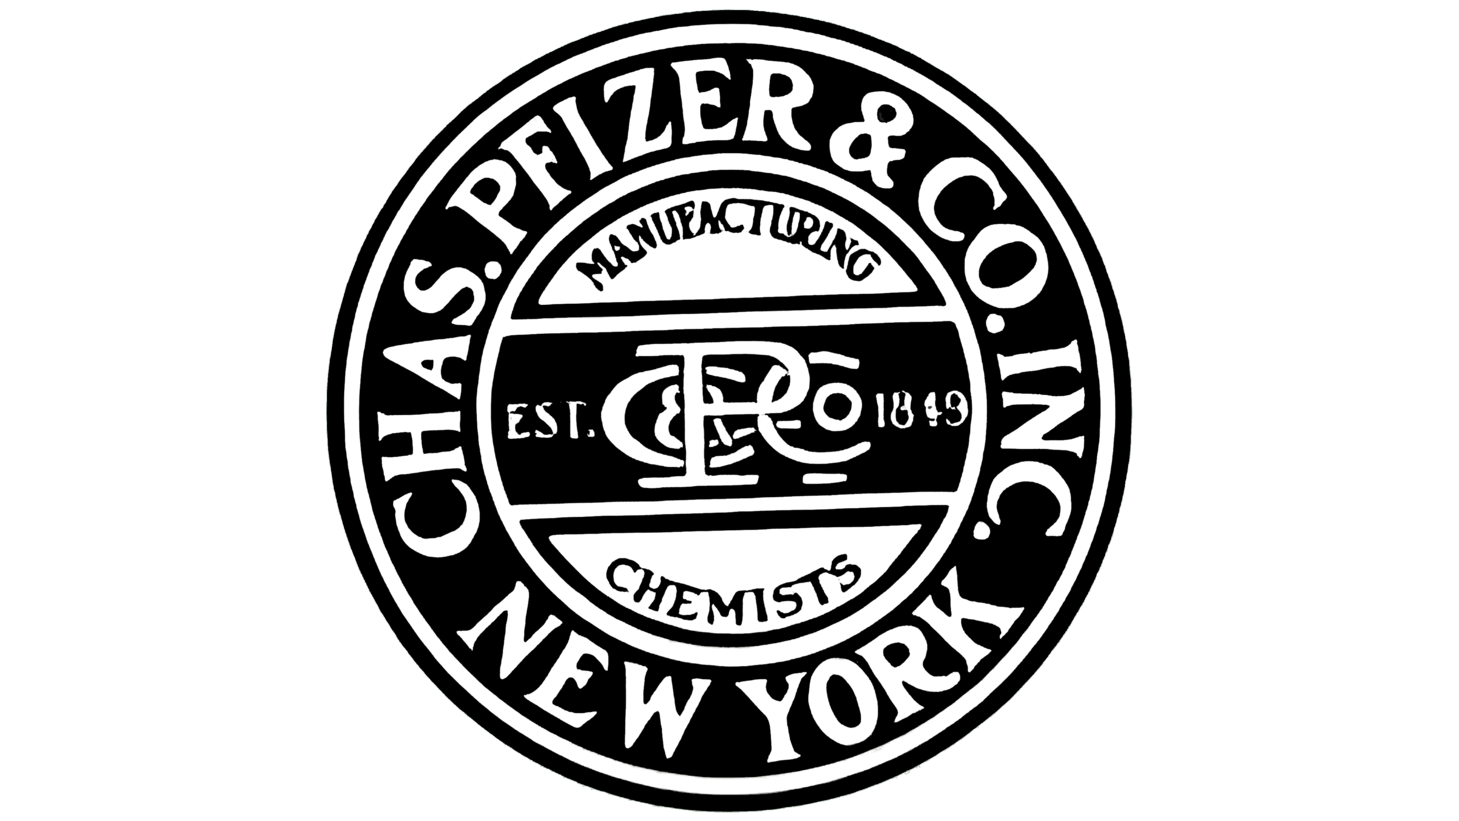 Chas pfizer company of new york sign 1849